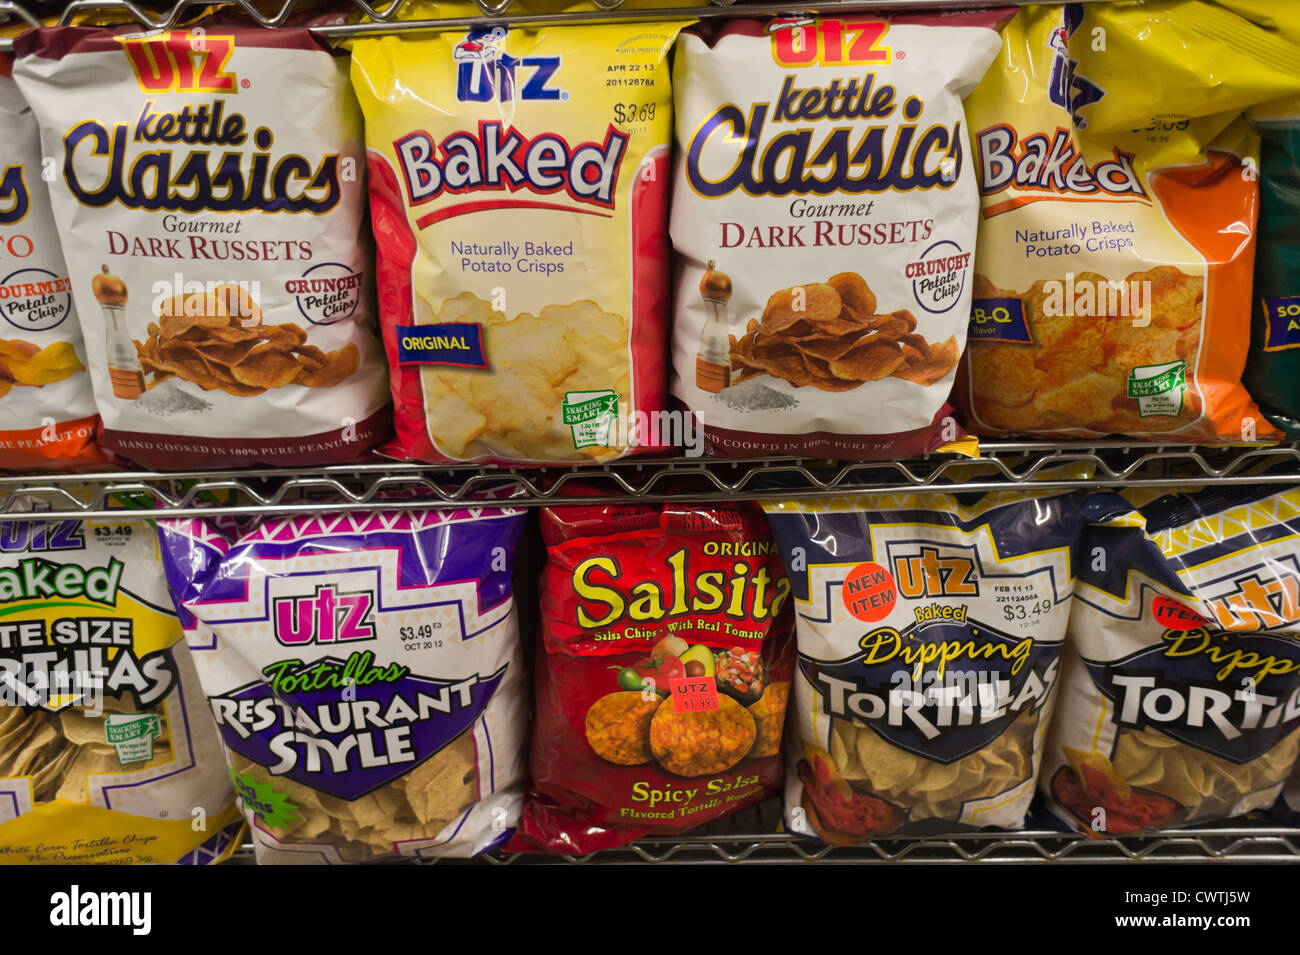 A display of Utz brand potato chips are seen in a supermarket in New York Stock Photo